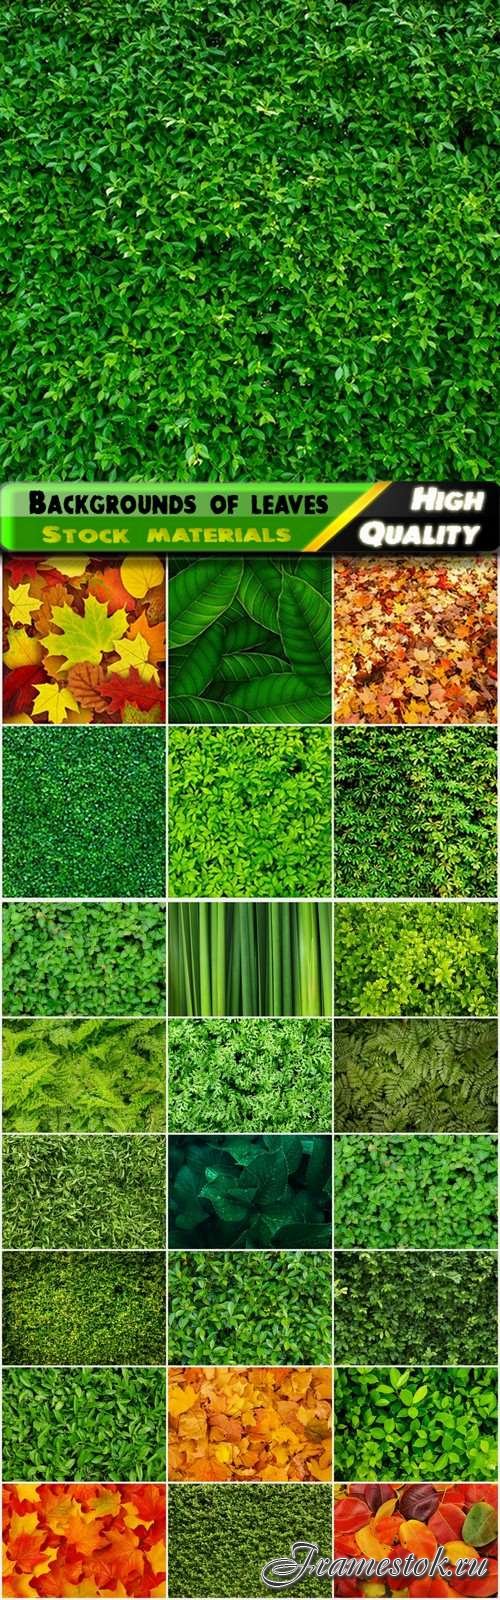 Backgrounds of green and yellow leaves and leaf - 25 HQ Jpg